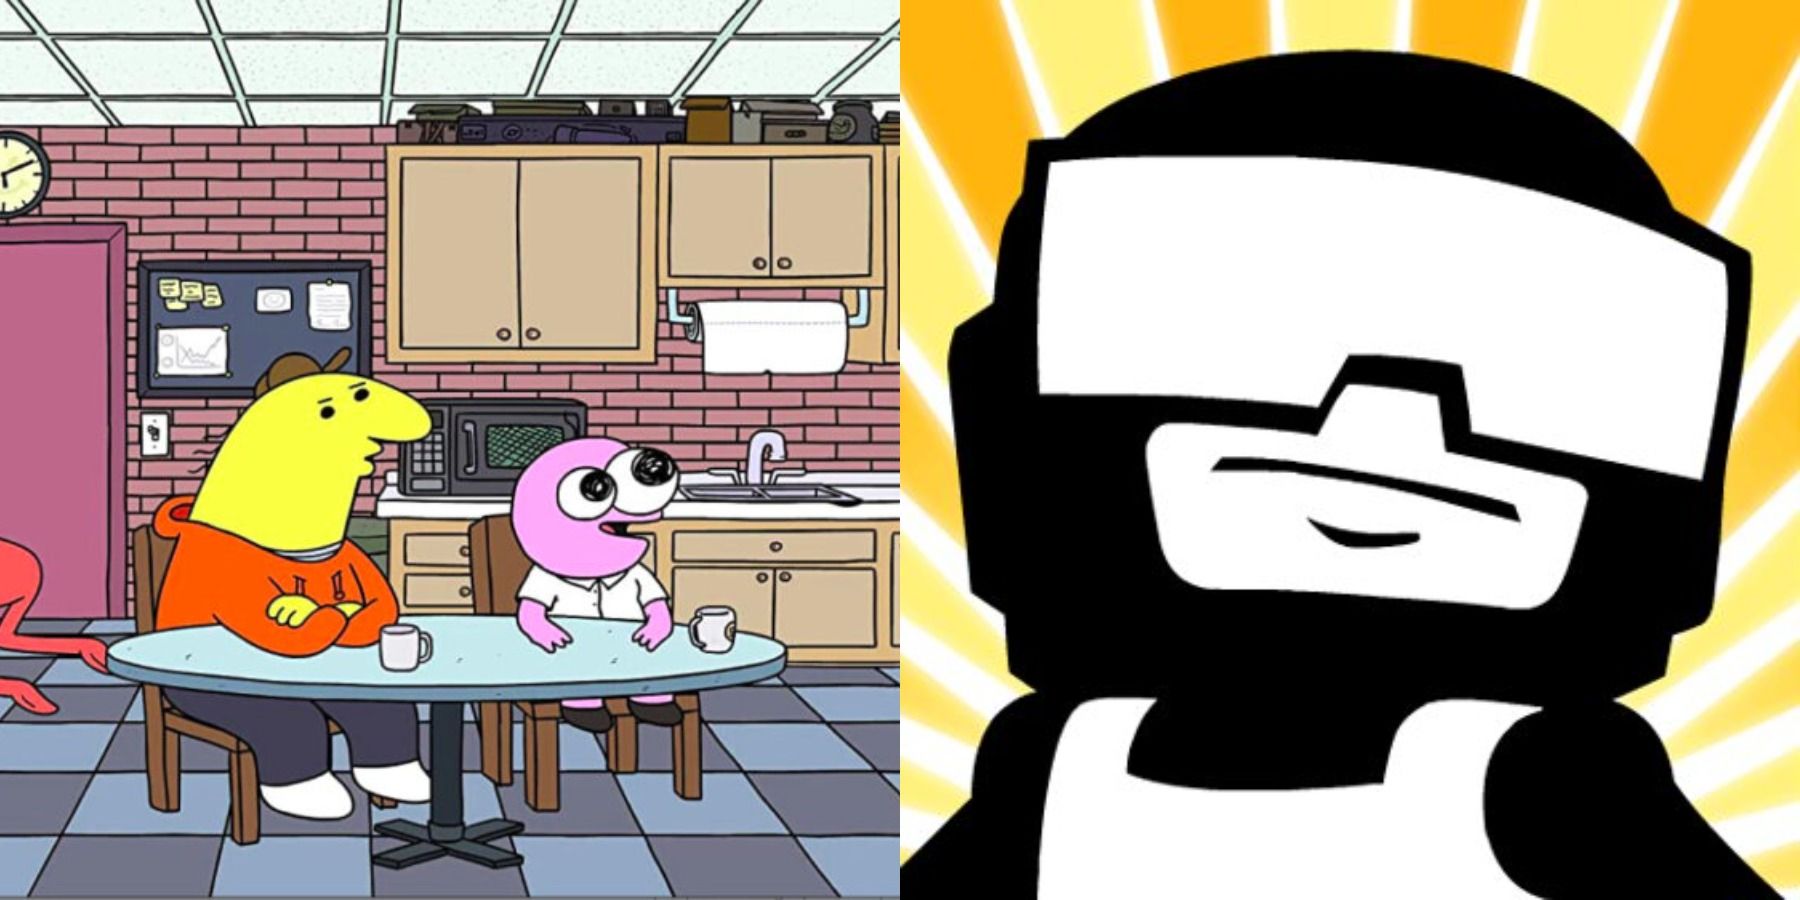 Pim and Charlie watch TV in Smiling Friends and The Newgrounds mascot.